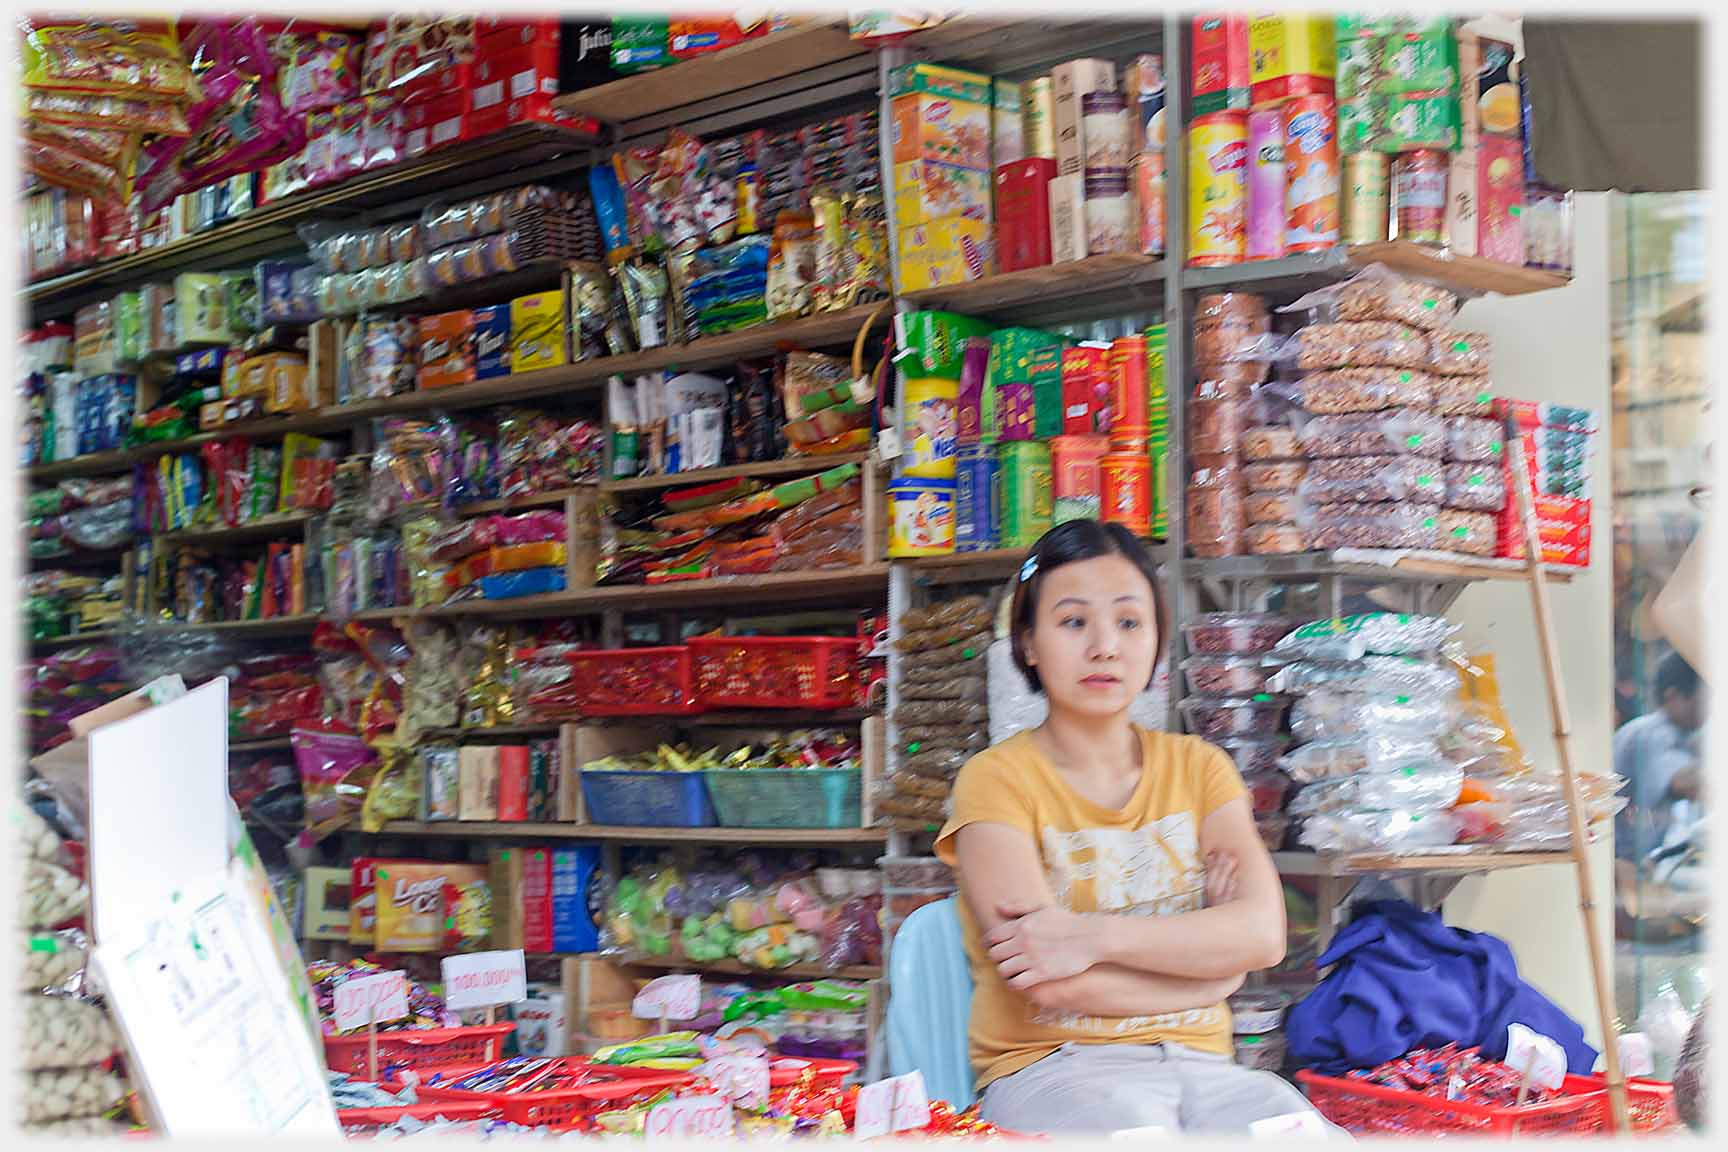 Woman with an air of abstraction in front of piled shelves of sweets.